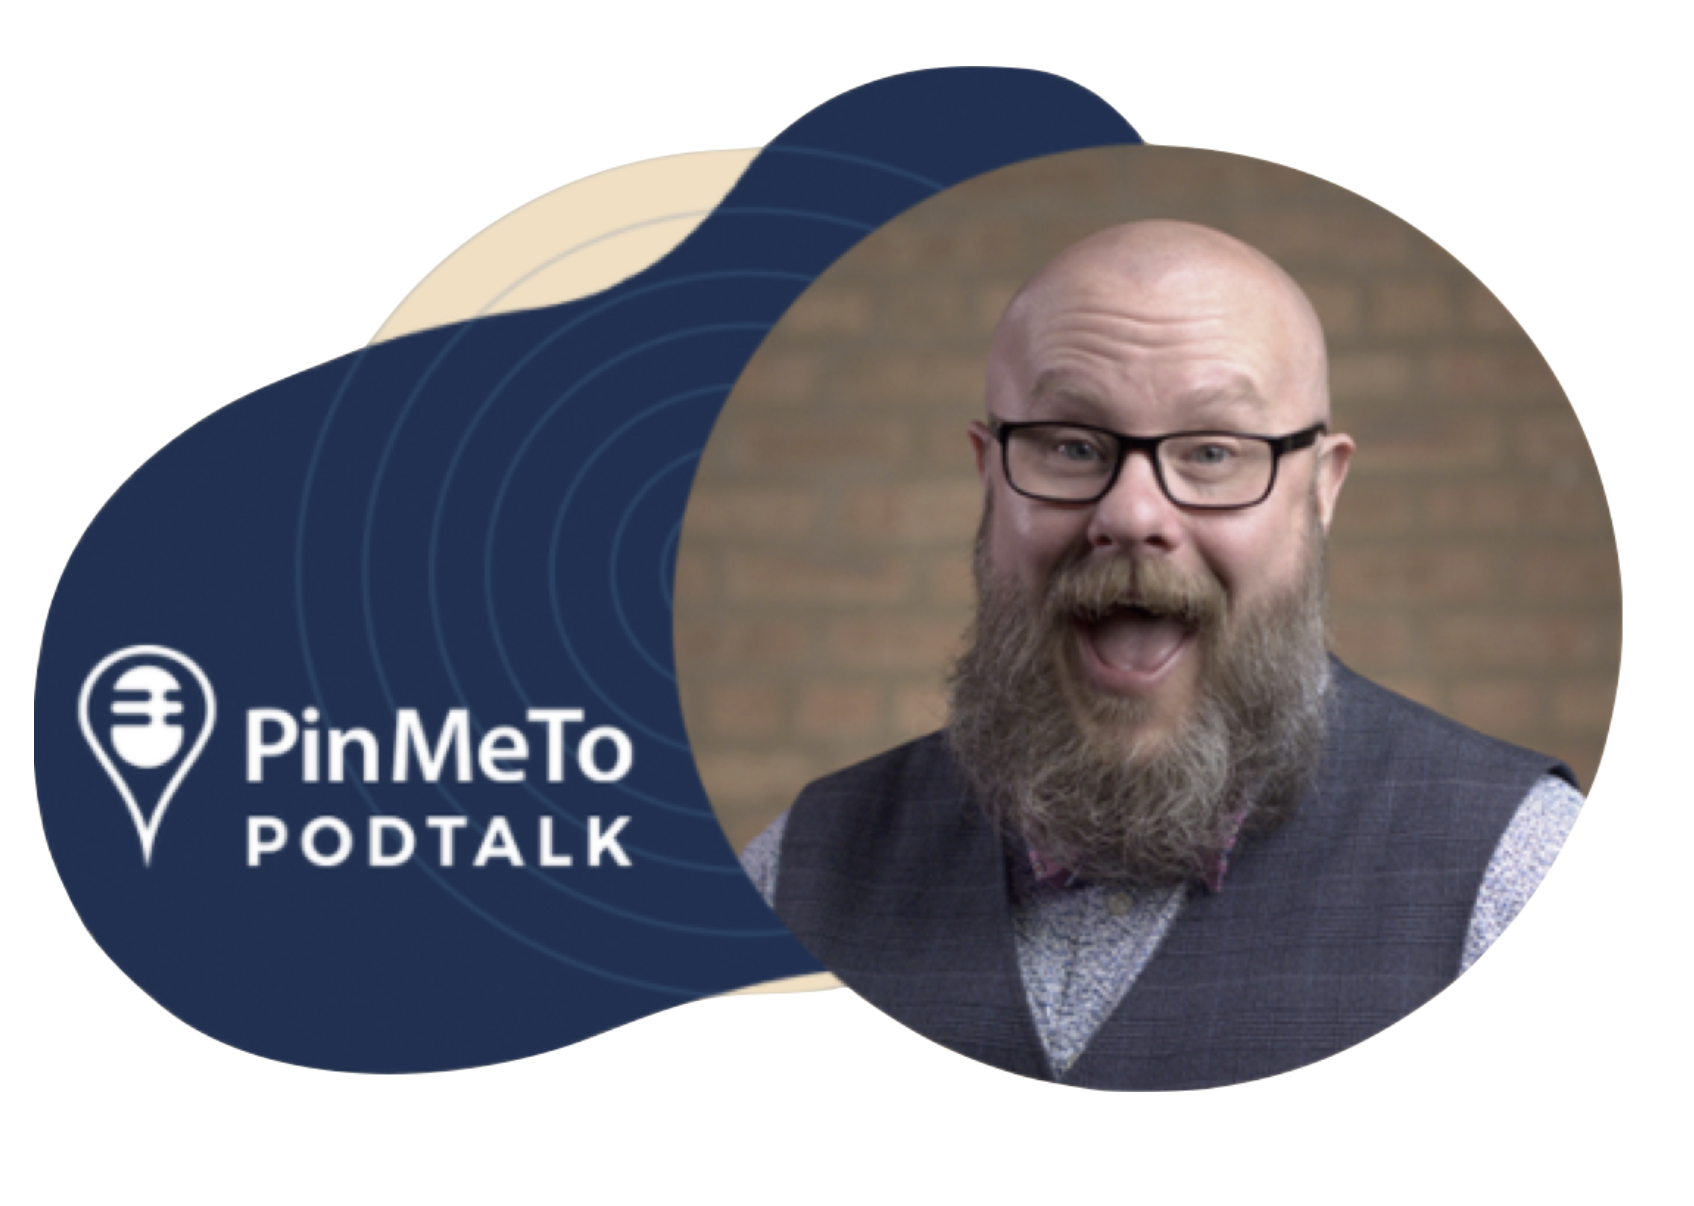 “Covid has changed consumer behavior. The businesses that are thriving during Covid are the ones that have adapted… Those changes in behavior are going to stay.” - – Greg Gifford, local SEO expert, on PinMeTo’s Let’s Talk Local podcast